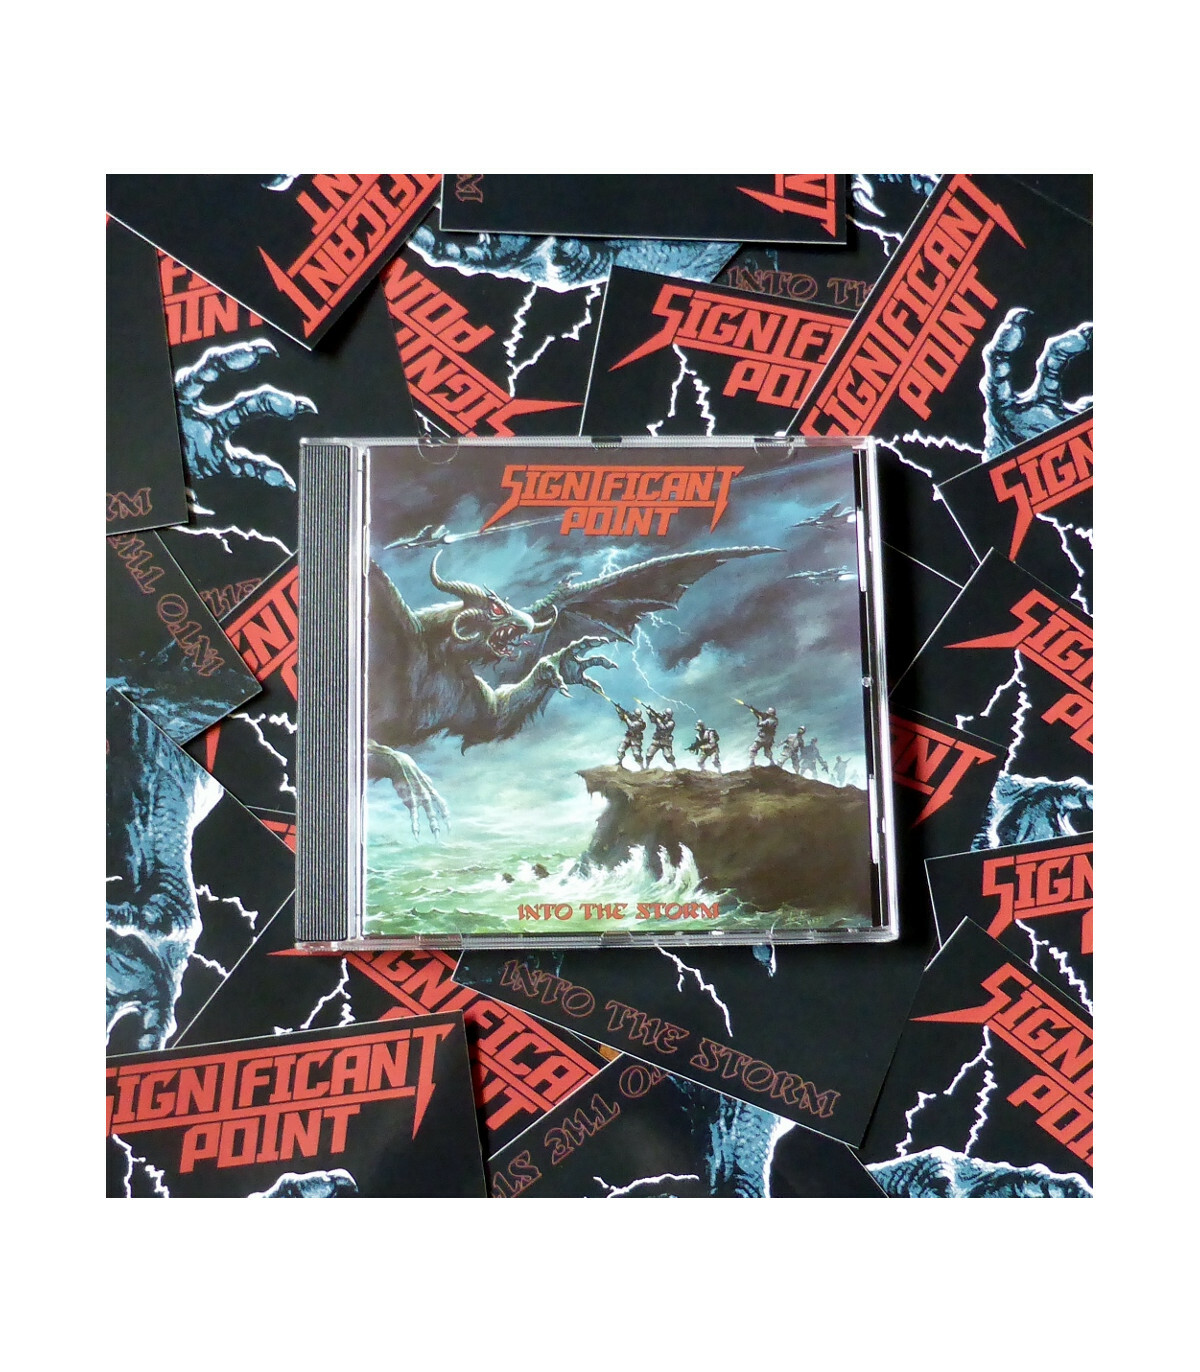 pre-order-significant-point-into-the-storm-cd.jpg